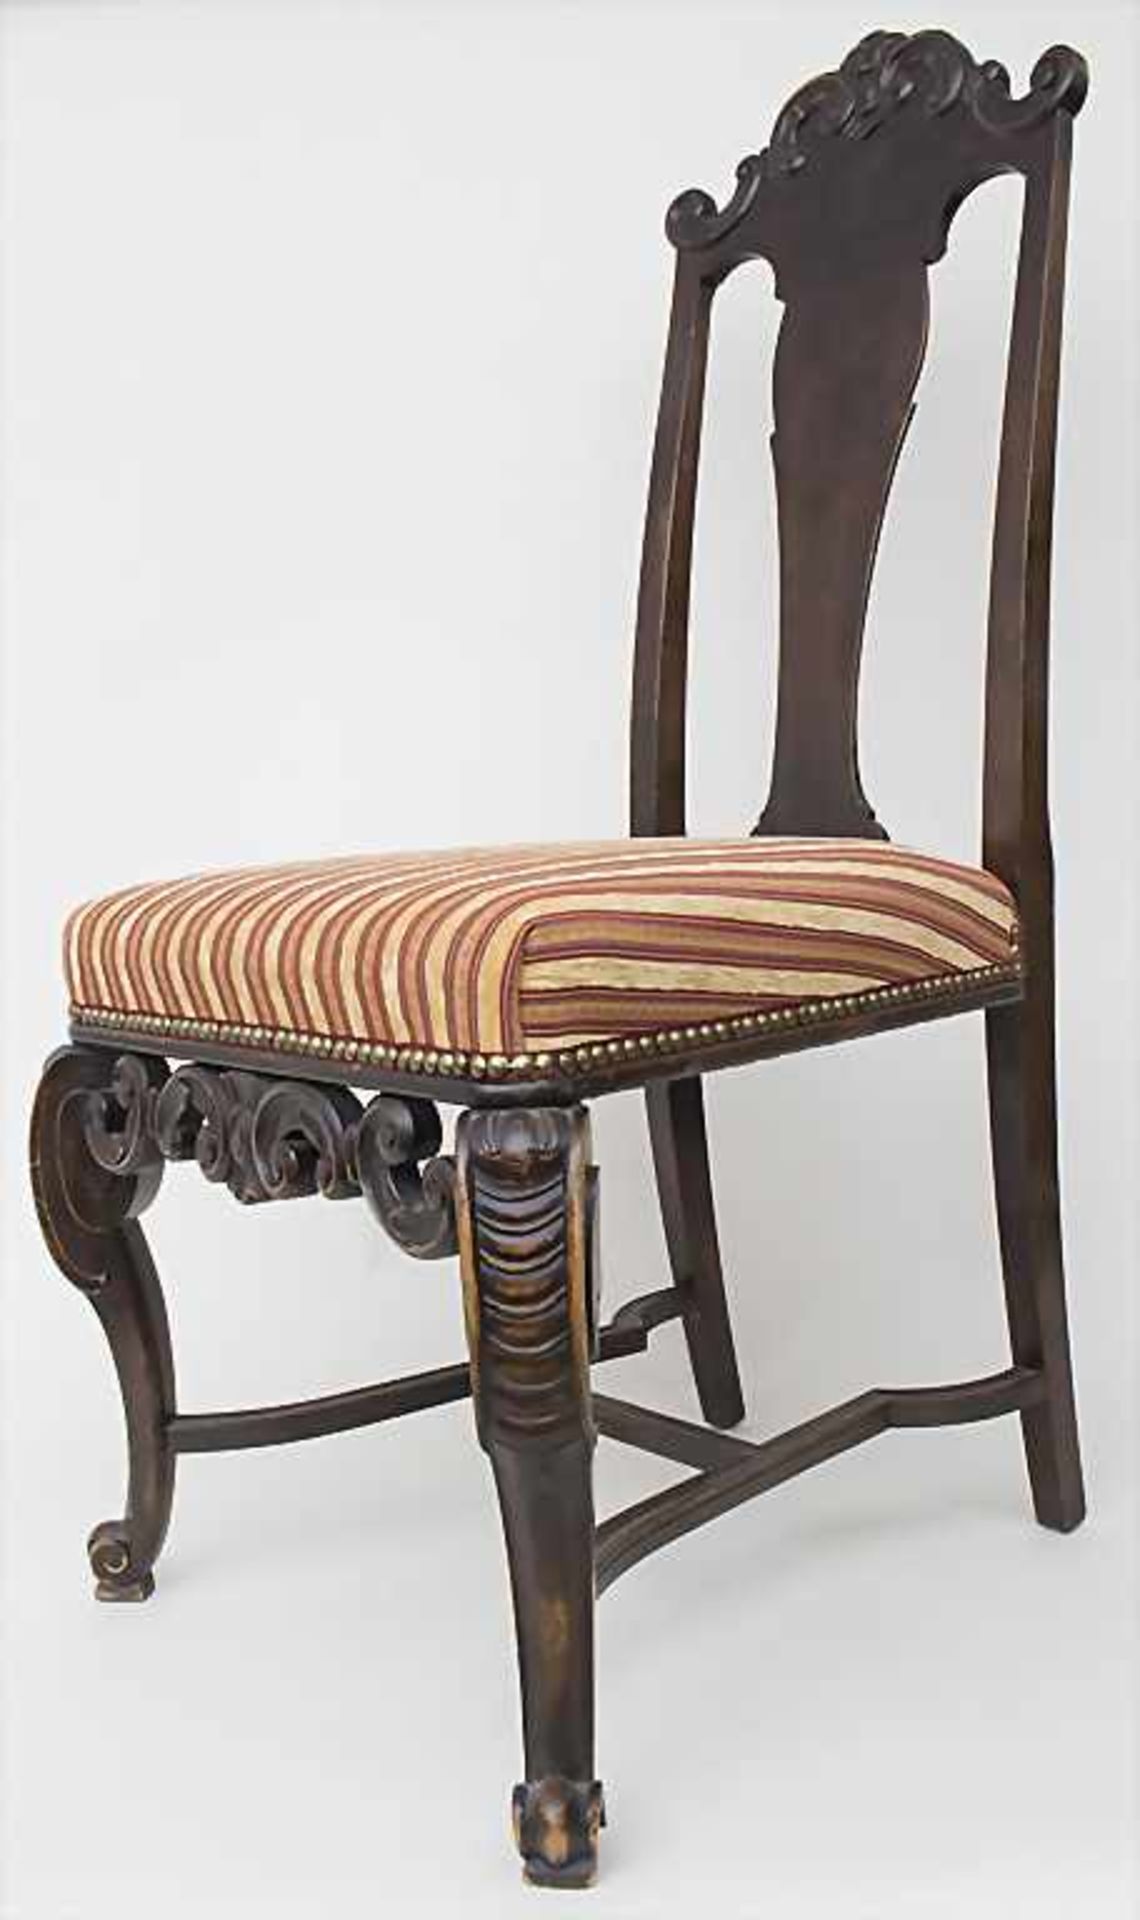 Paar Historismus-Stühle / A pair of historism chairs, 19. Jh. - Image 2 of 5